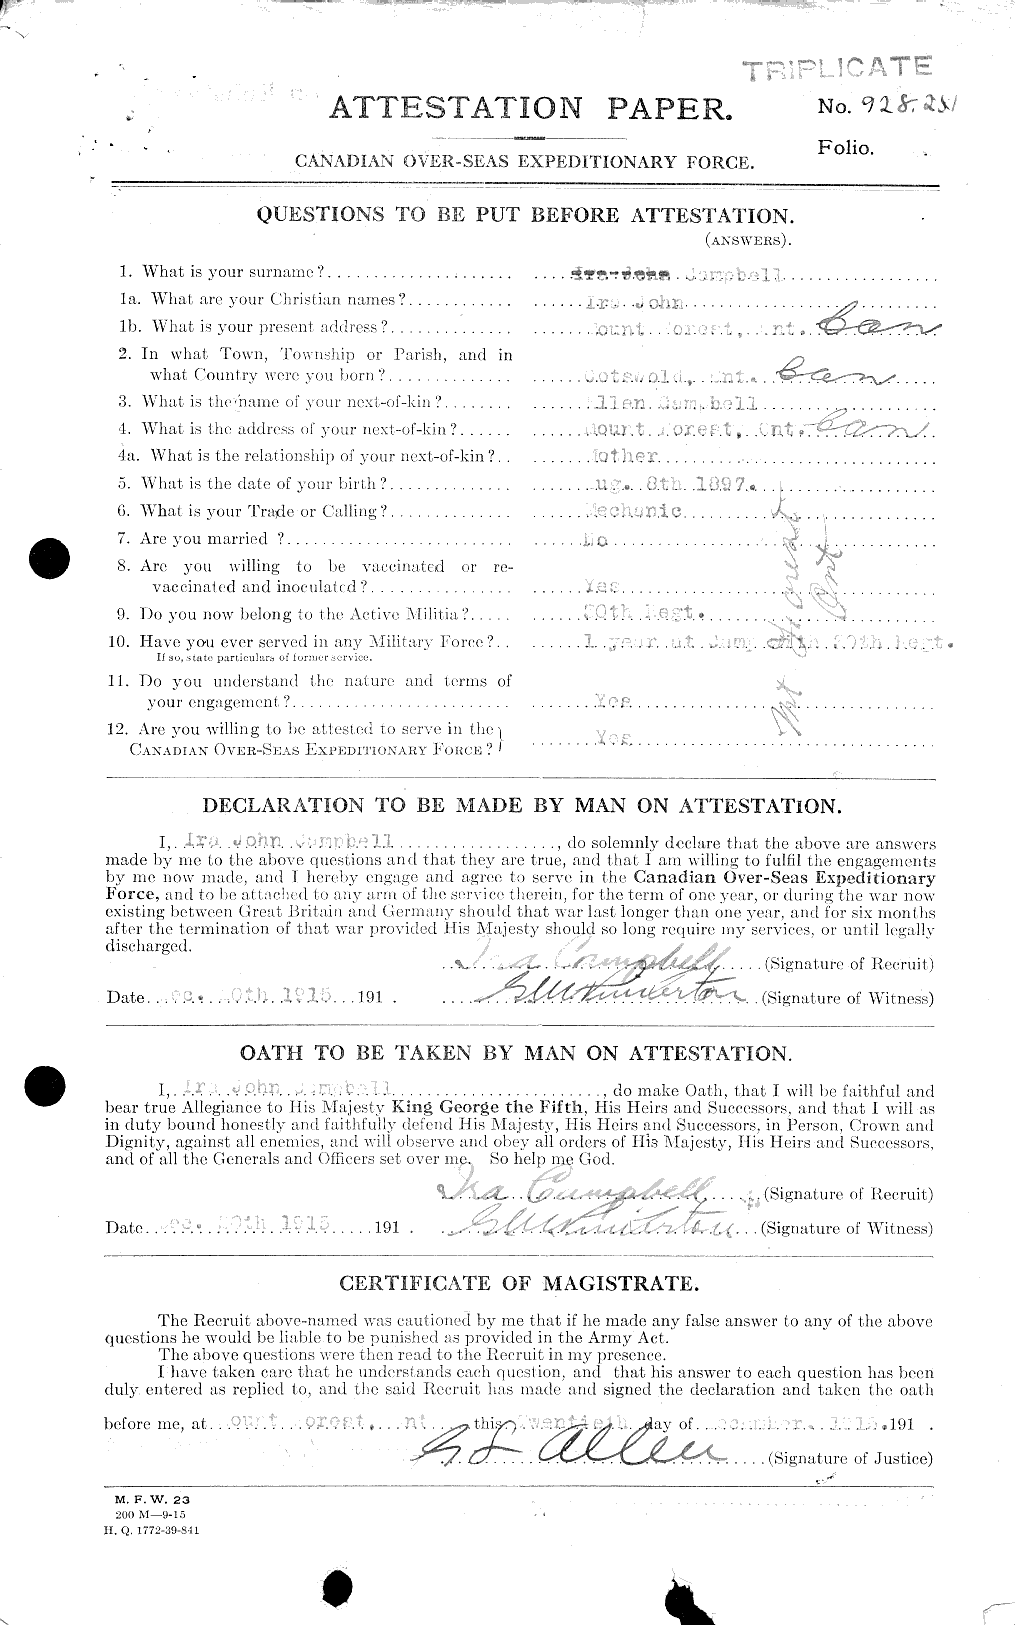 Personnel Records of the First World War - CEF 002748a